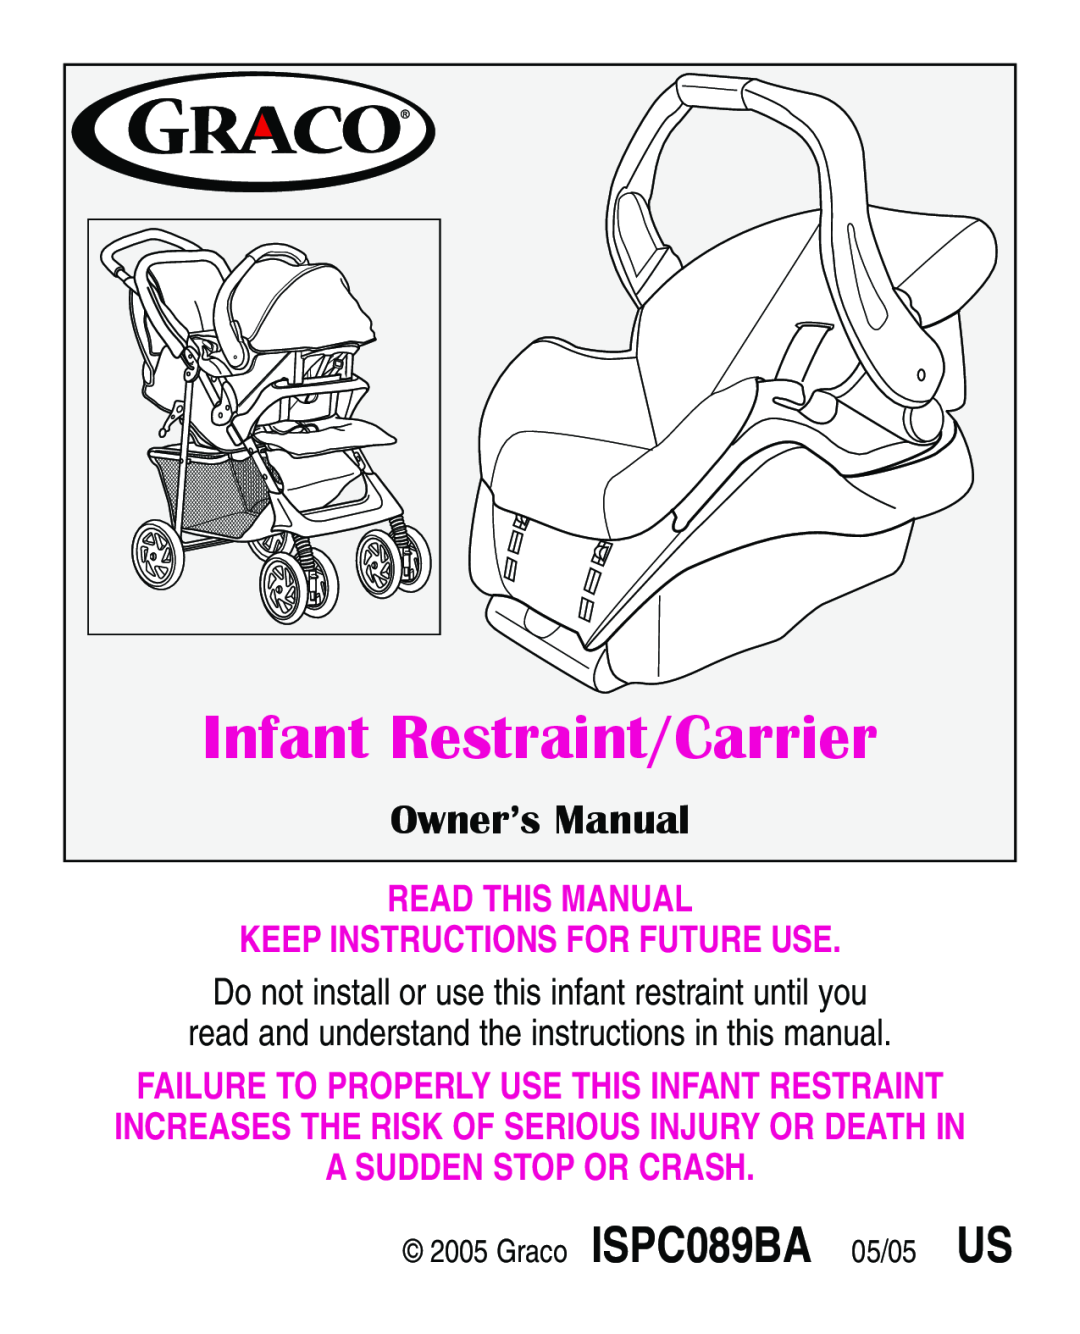 Graco ISPA108AB manual Owner’s Manual, Read This Manual Keep Instructions For Future Use, Infant Restraint/Carrier 